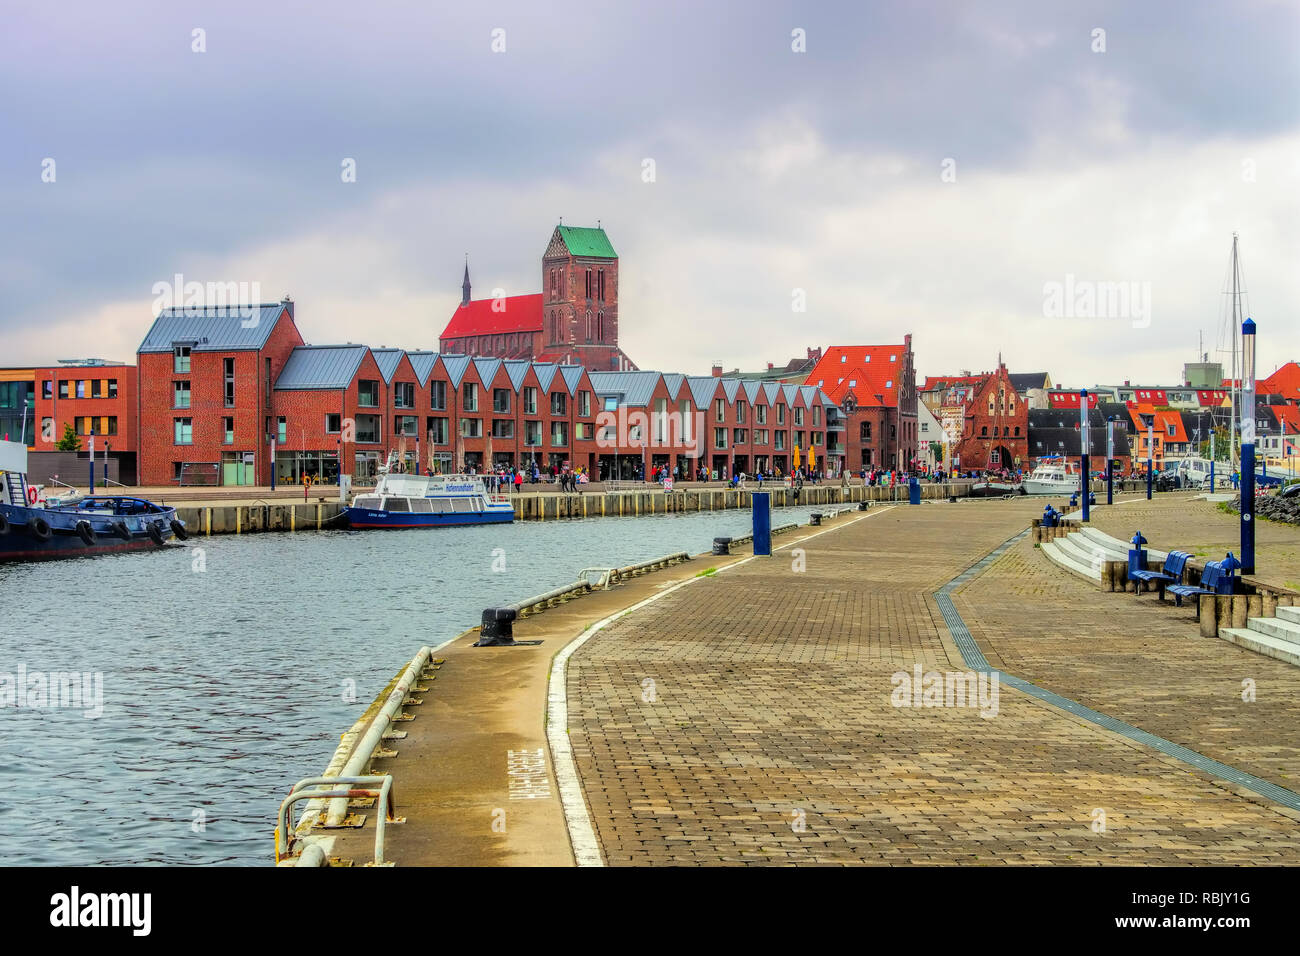 in the old port of the town Wismar in northern Germany Stock Photo